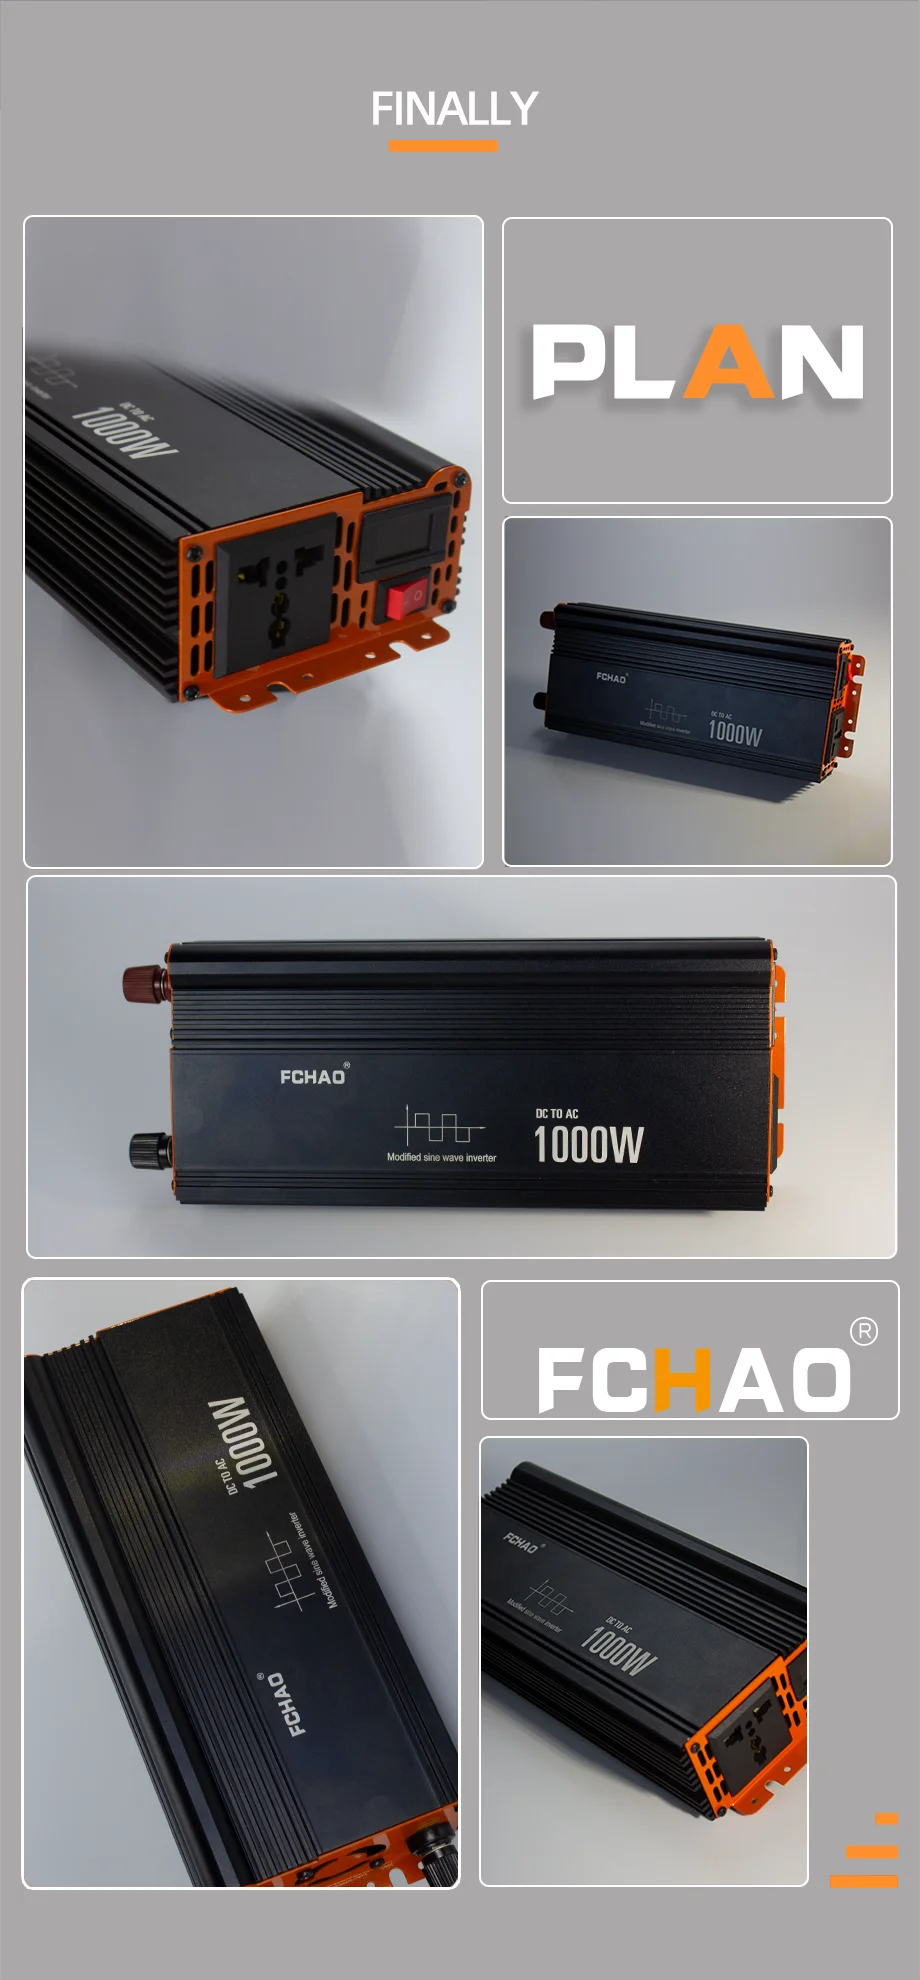 FCHAO 1000W Ups Modified Sine Wave Inverter, Multi-purpose inverter for cars, homes, solar, and outdoors.